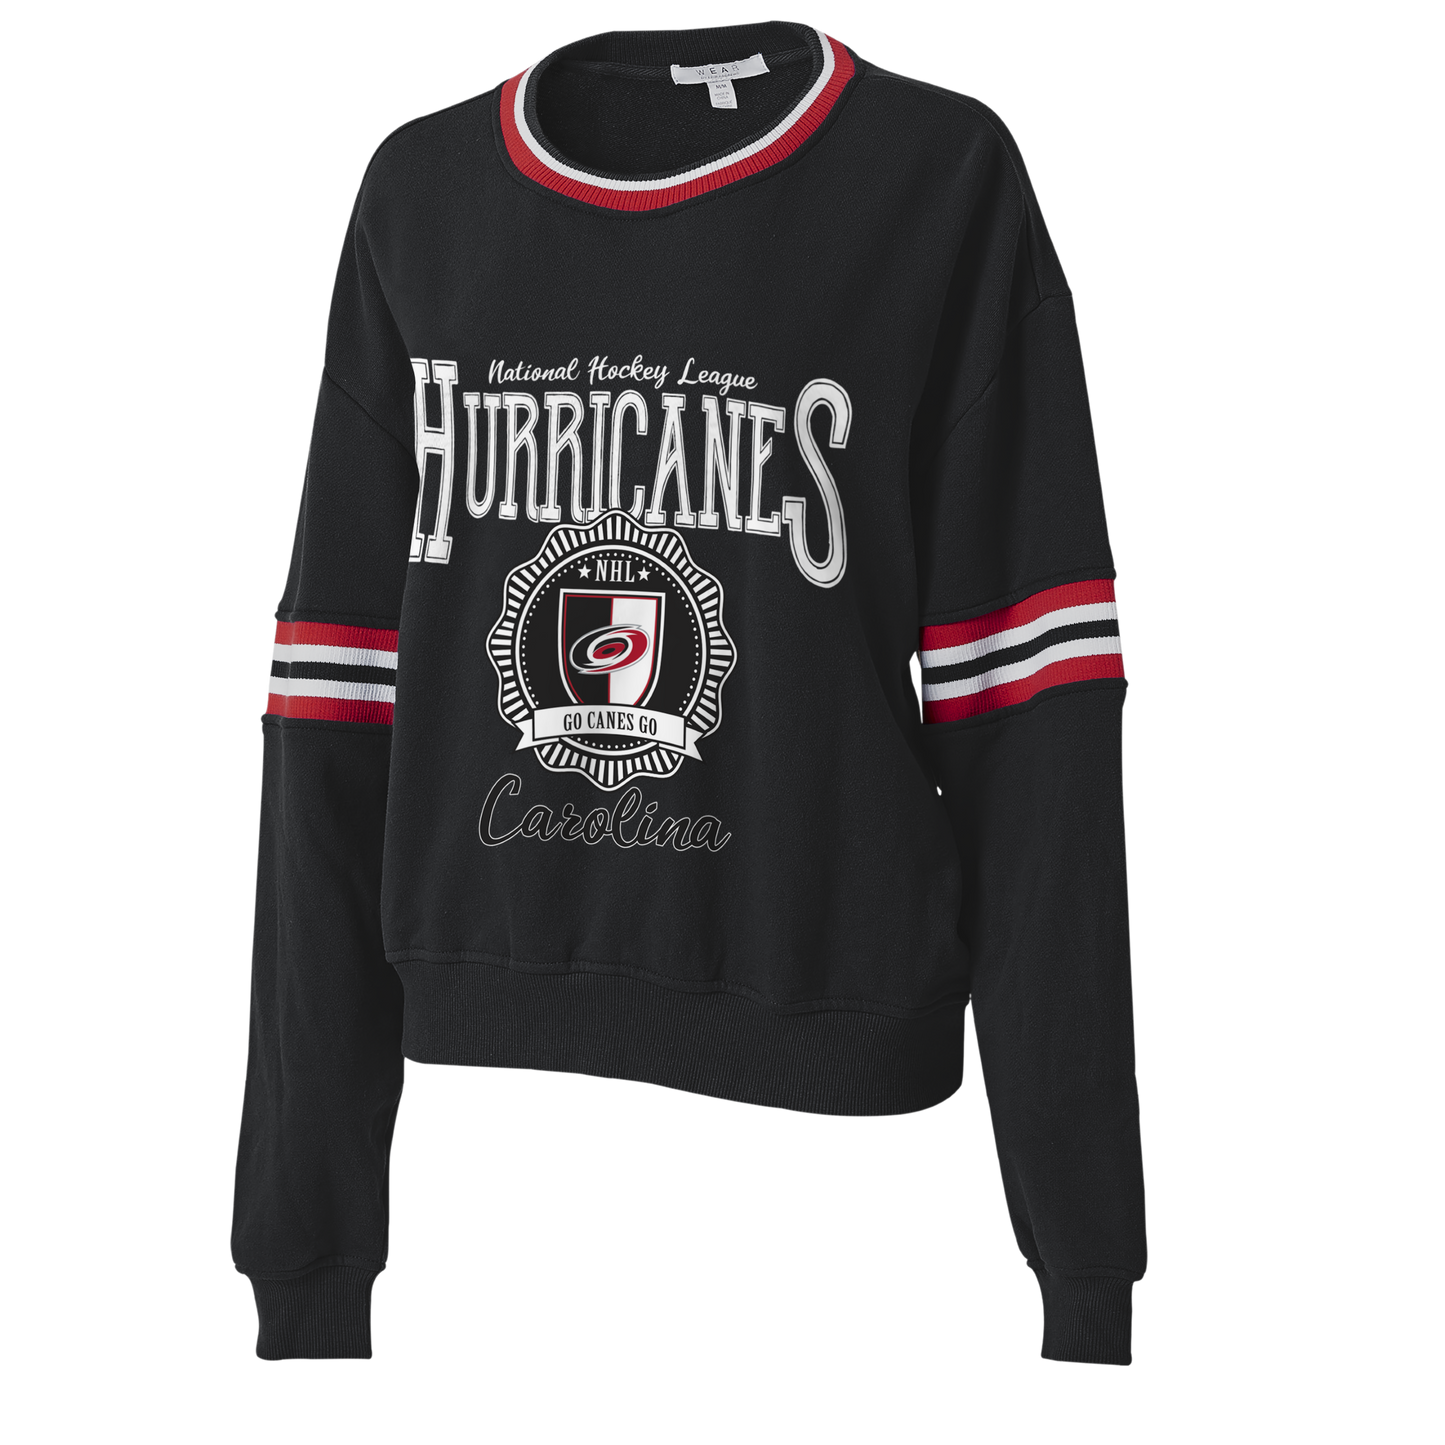 Front: Black crewneck with Carolina Hurricanes university style graphic and red white and black striping on sleeves